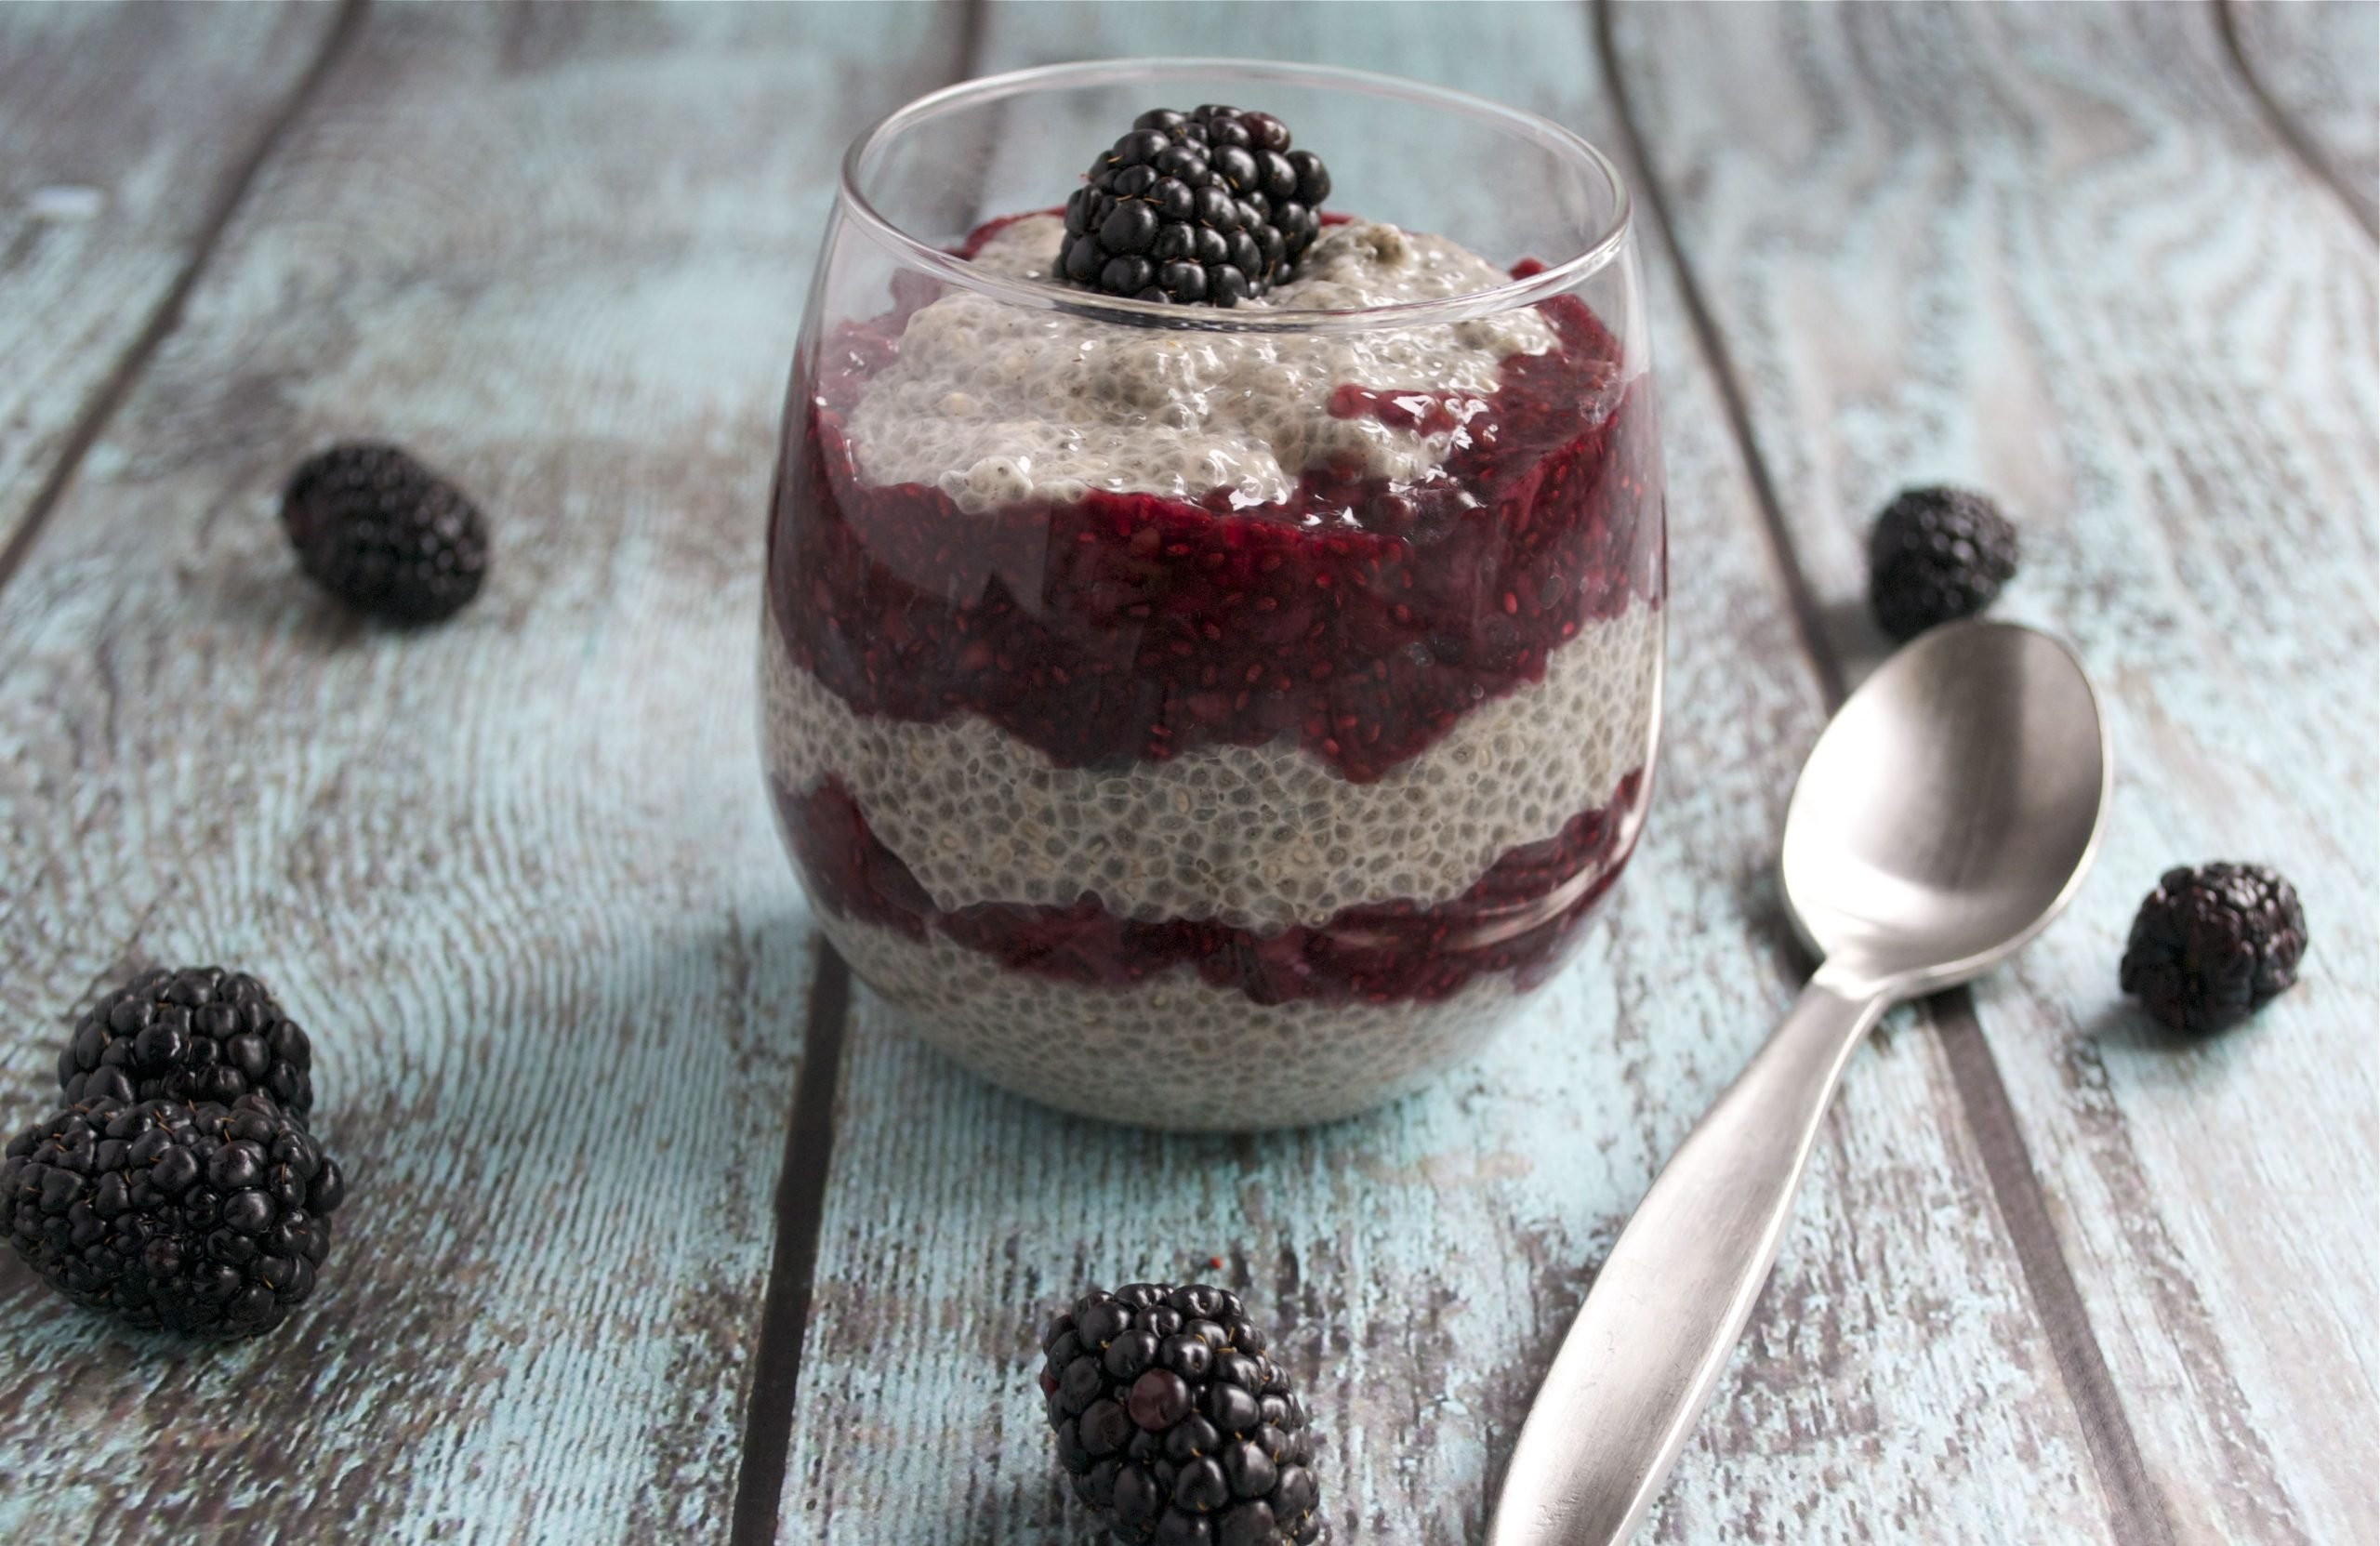 Chia Seed Pudding with Blackberry Chia Compote - gluten-free, dairy-free, sugar-free and vegan | A Dash of Megnut